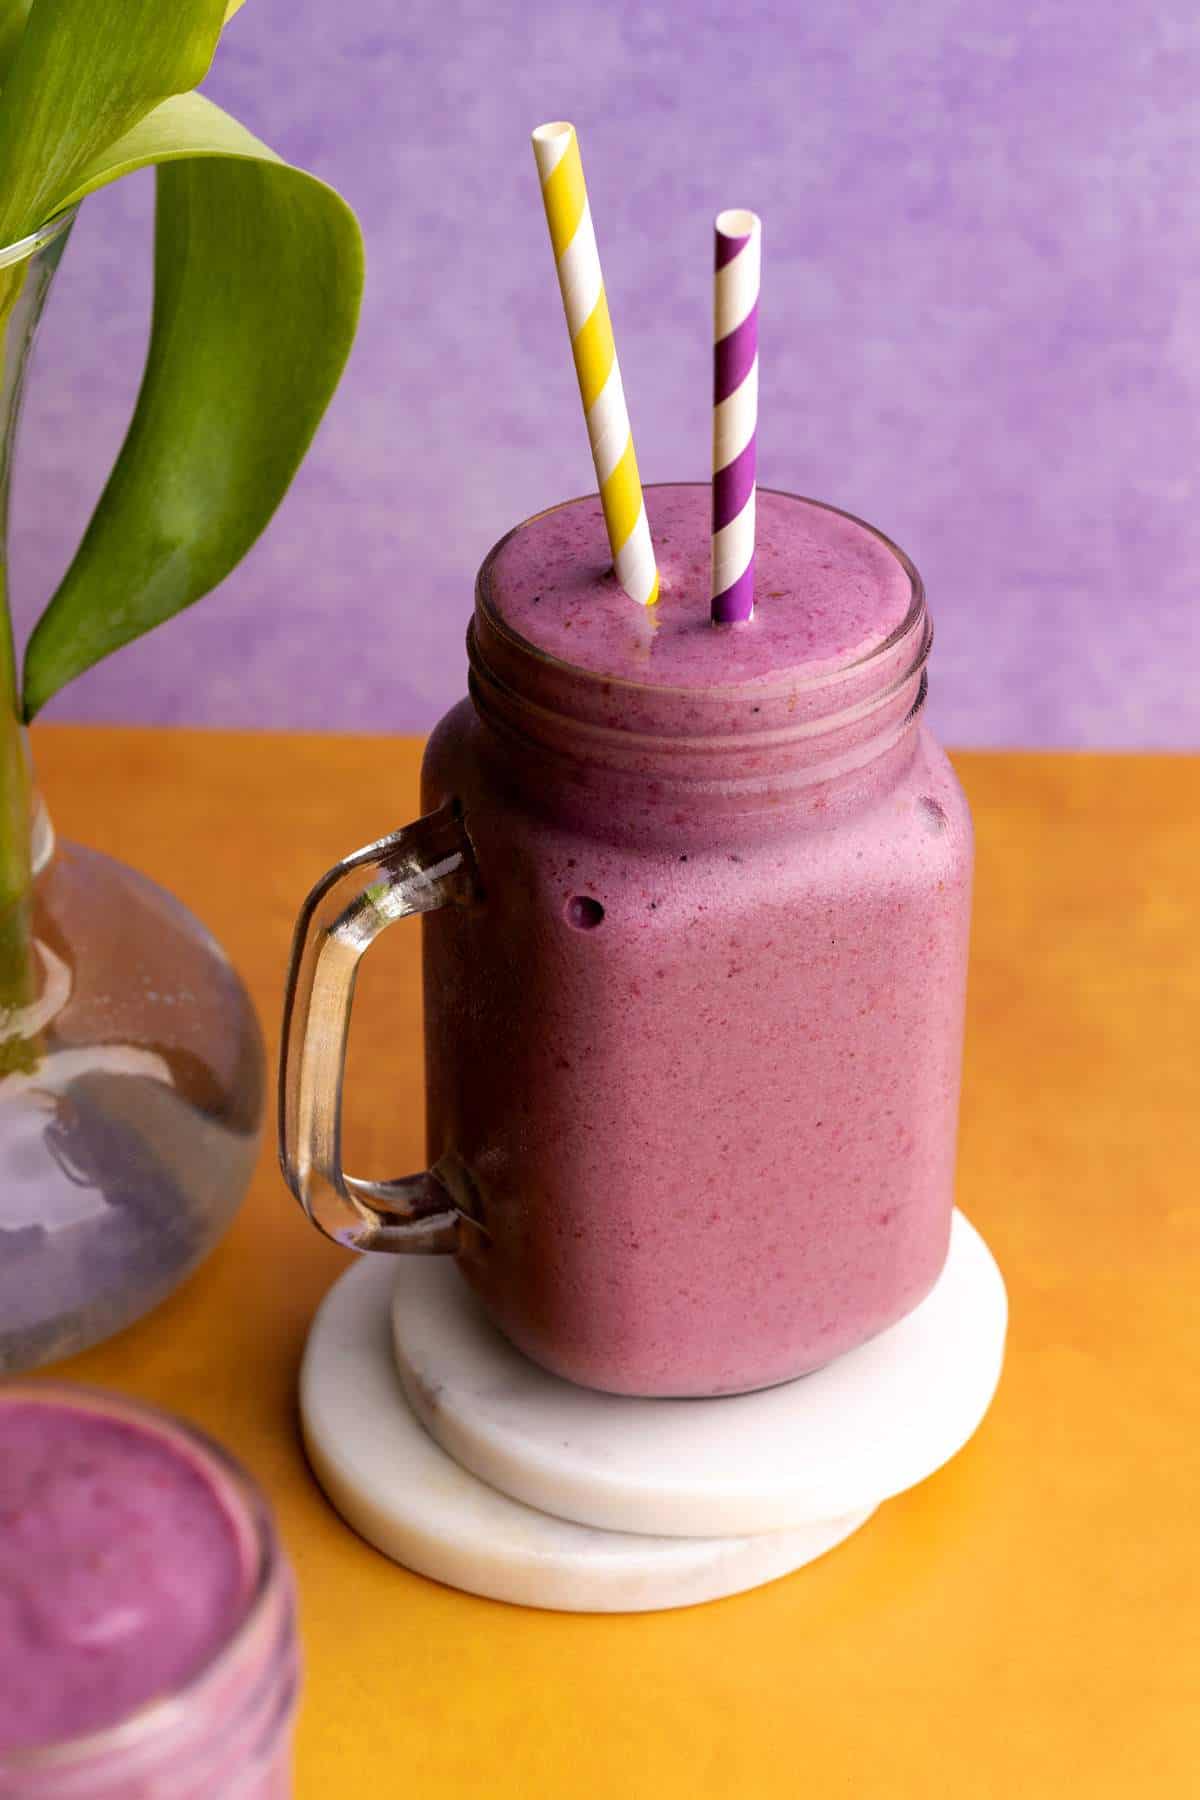 Blackberry and banana smoothie in a jar on a coaster.